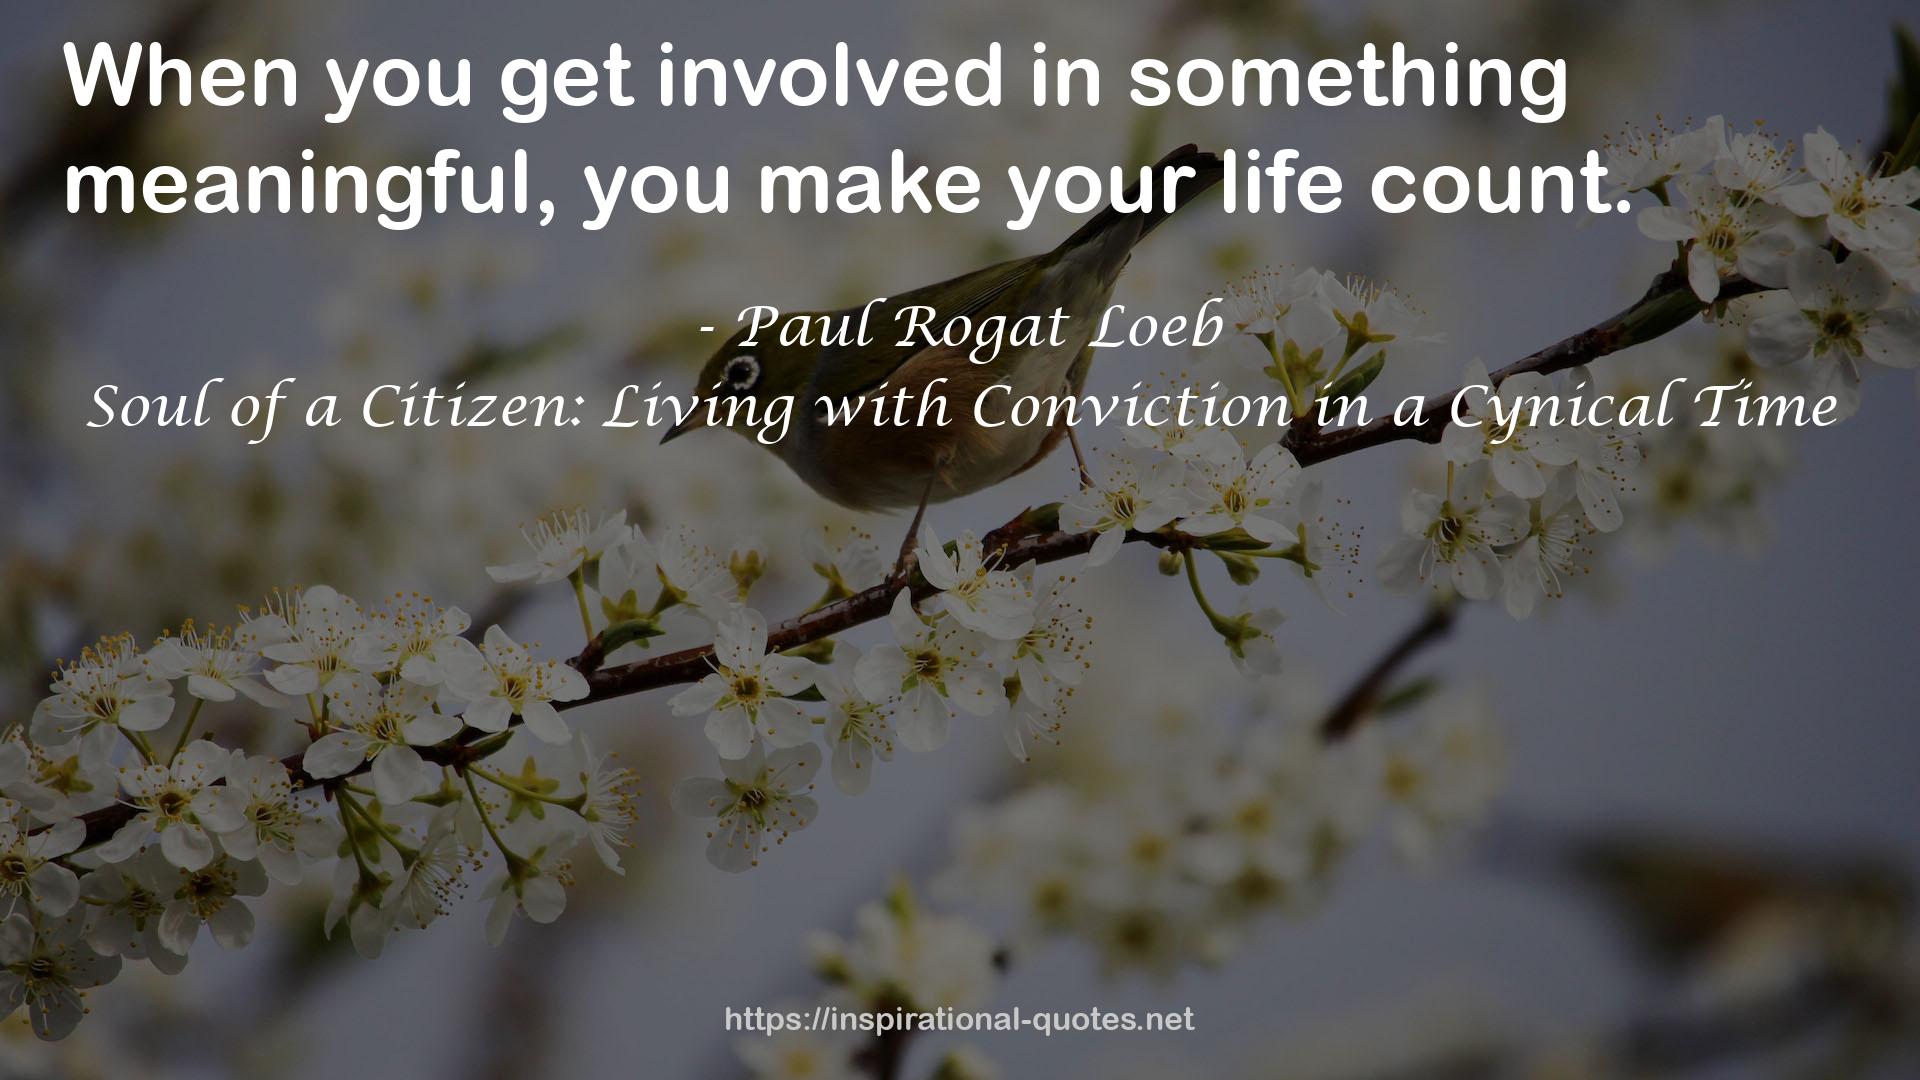 Soul of a Citizen: Living with Conviction in a Cynical Time QUOTES